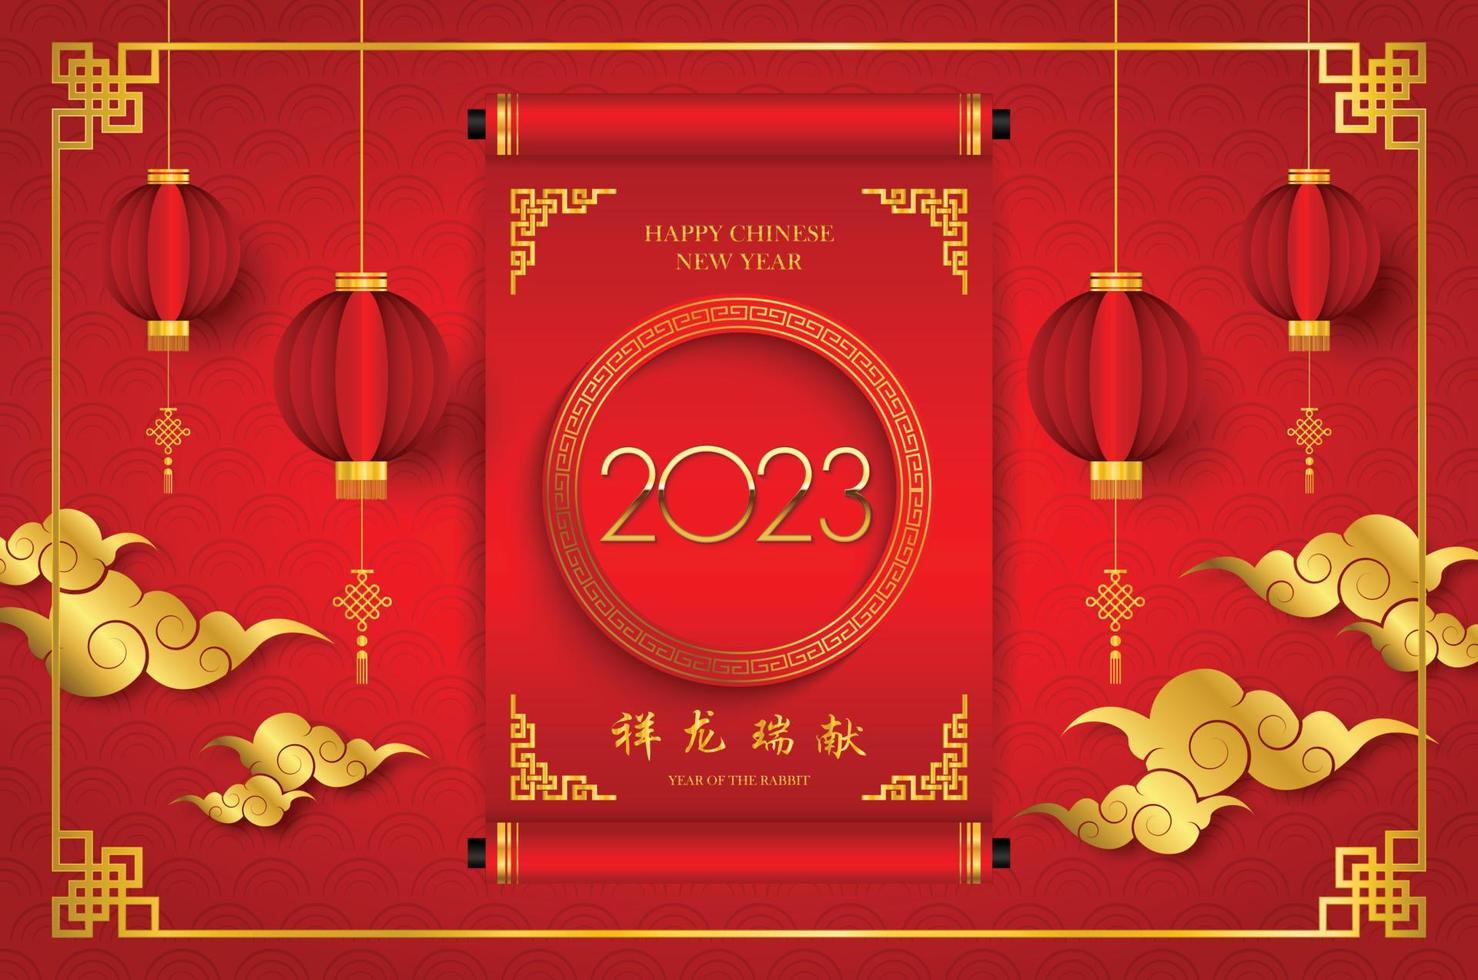 happy-chinese-new-year-2023-in-golden-chinese-pattern-frame-chinese